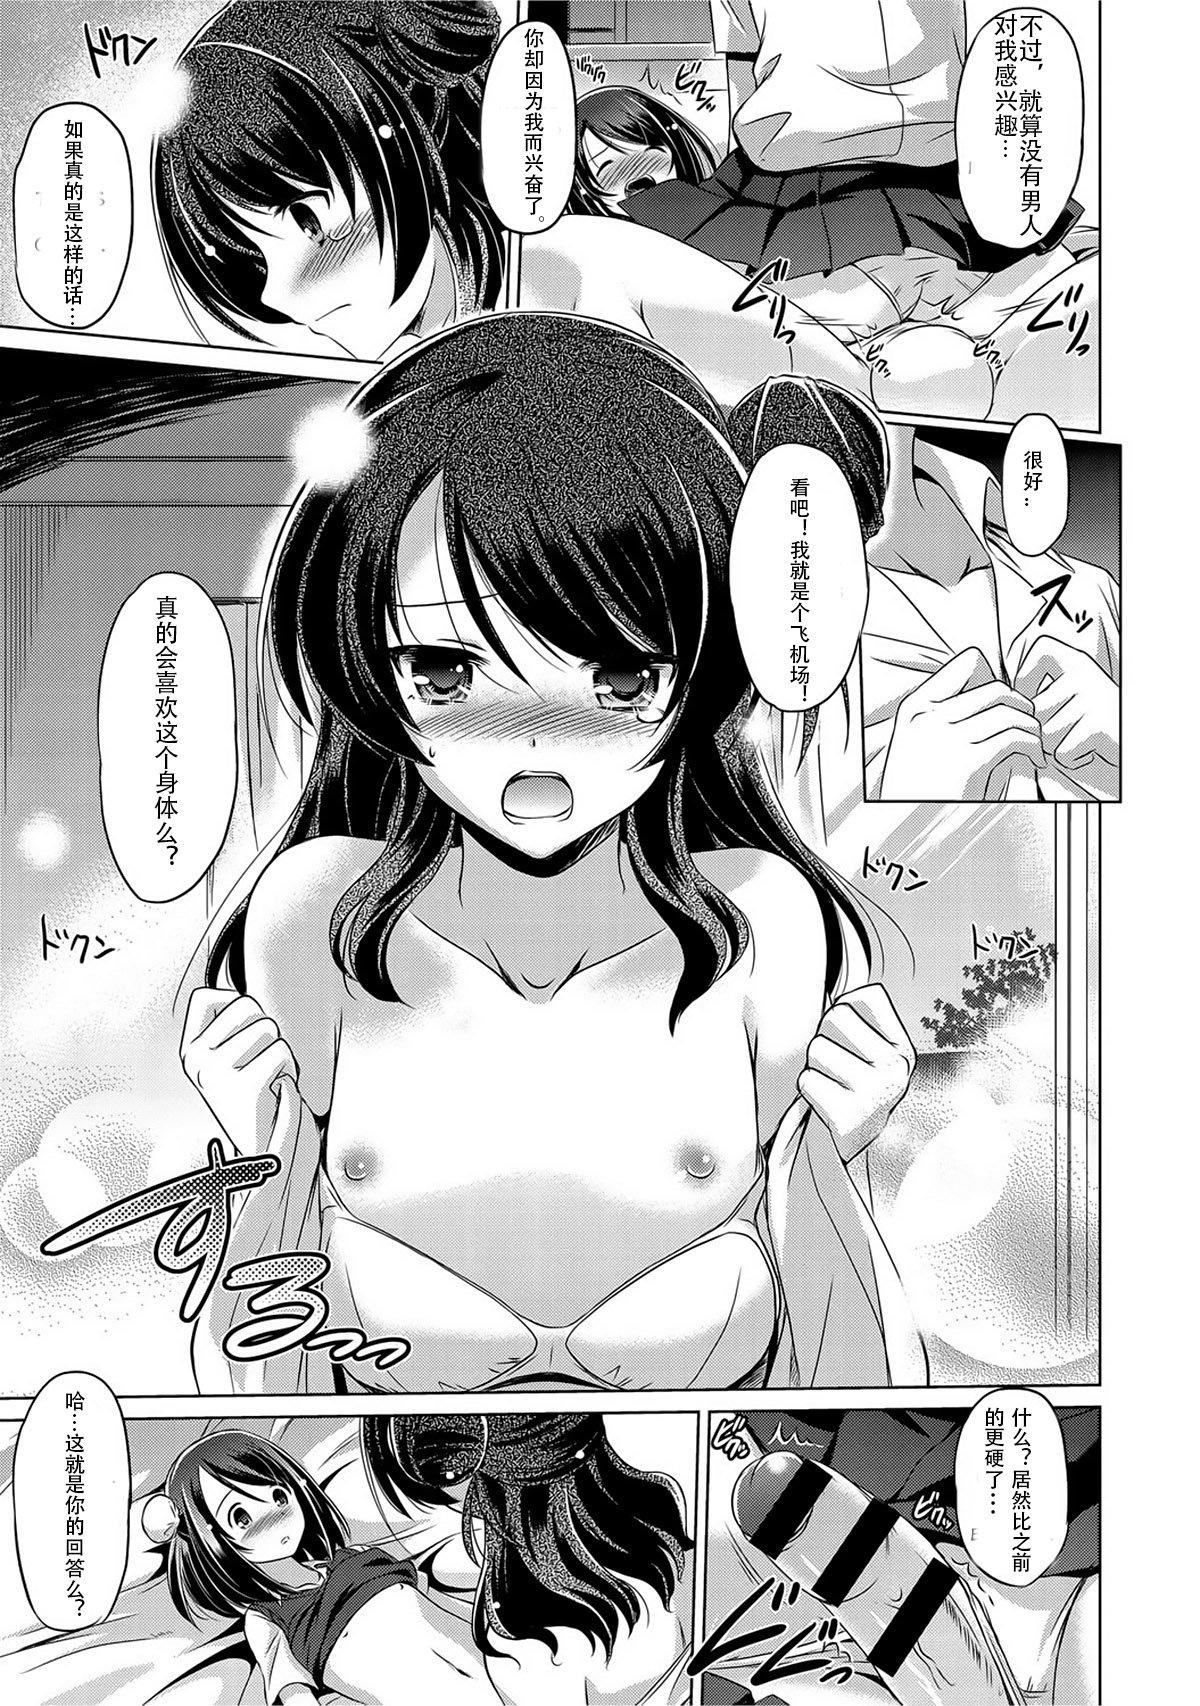 Asian Babes Minna no Hoshii Mono | The Thing that Everyone Wants Rough - Page 9